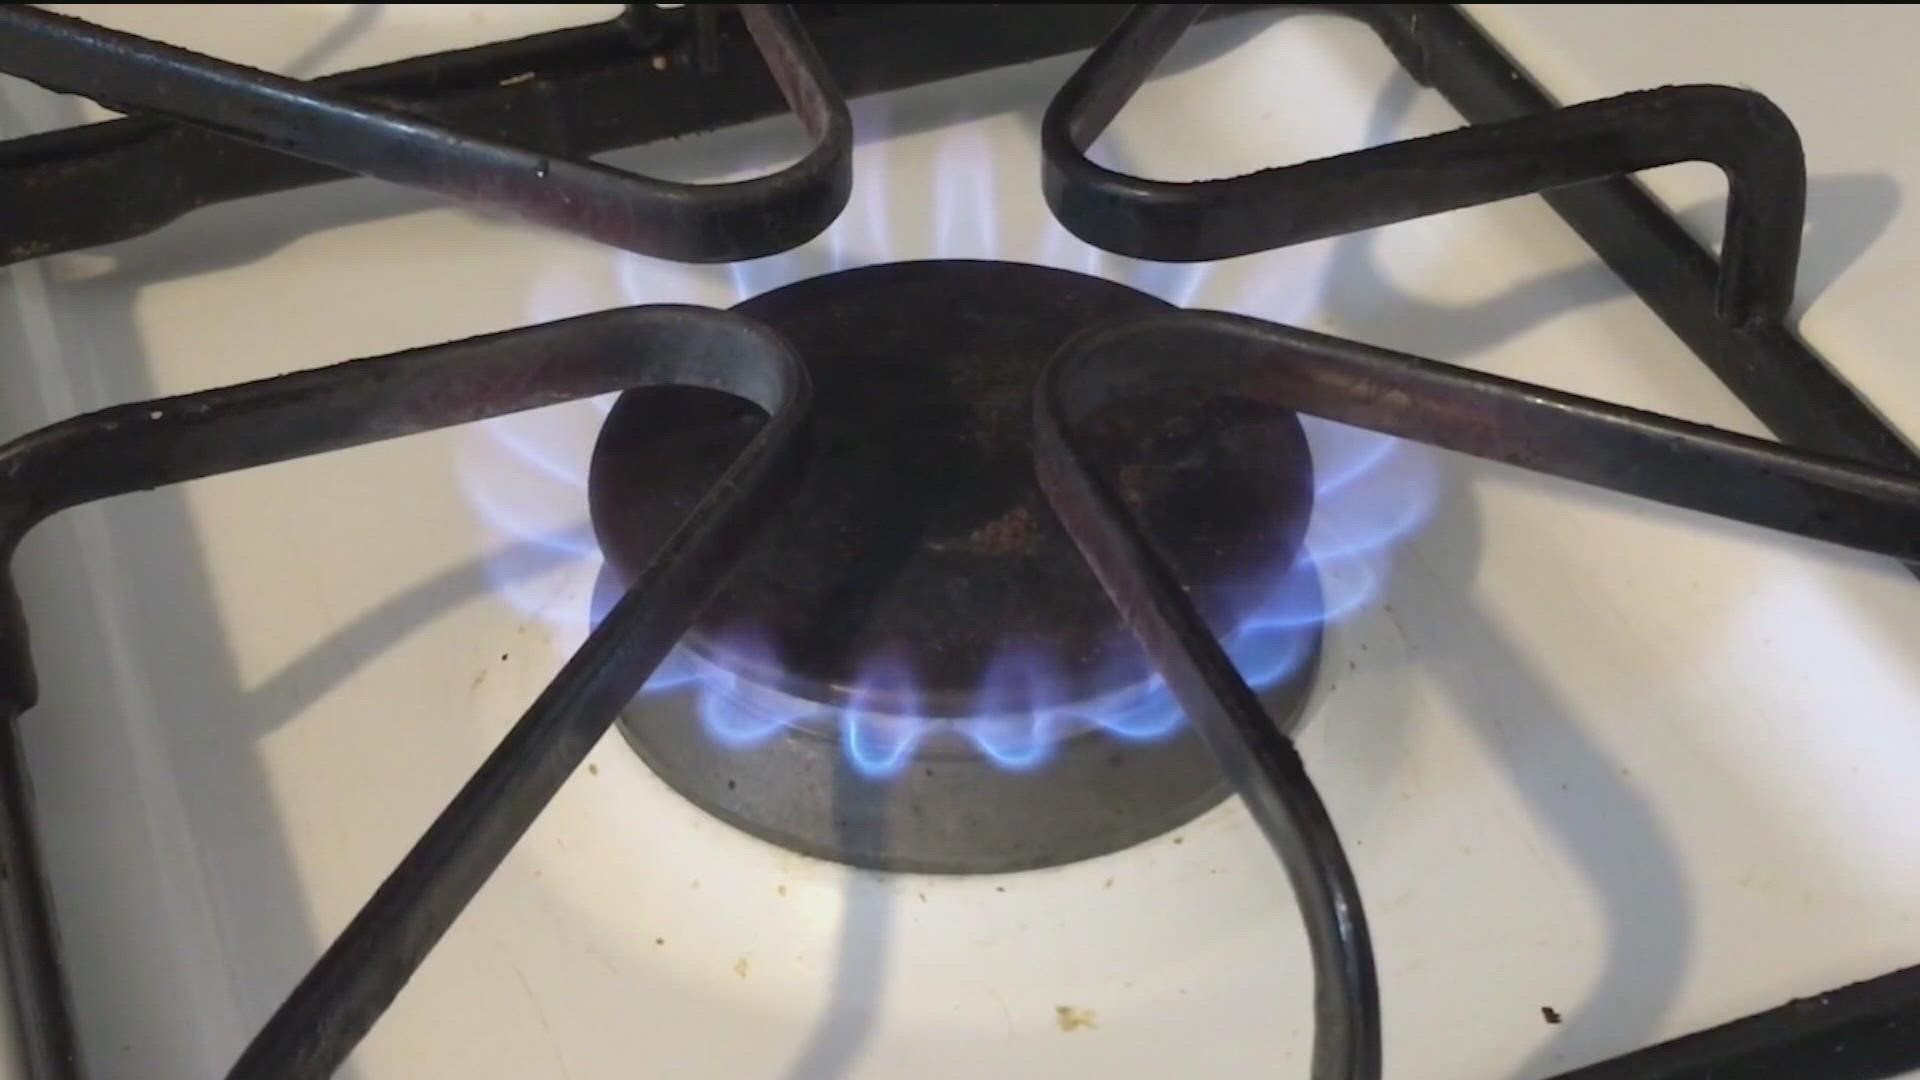 A previous study has shown that these gas leaks can occur even when stoves and other gas-powered appliances are turned off.